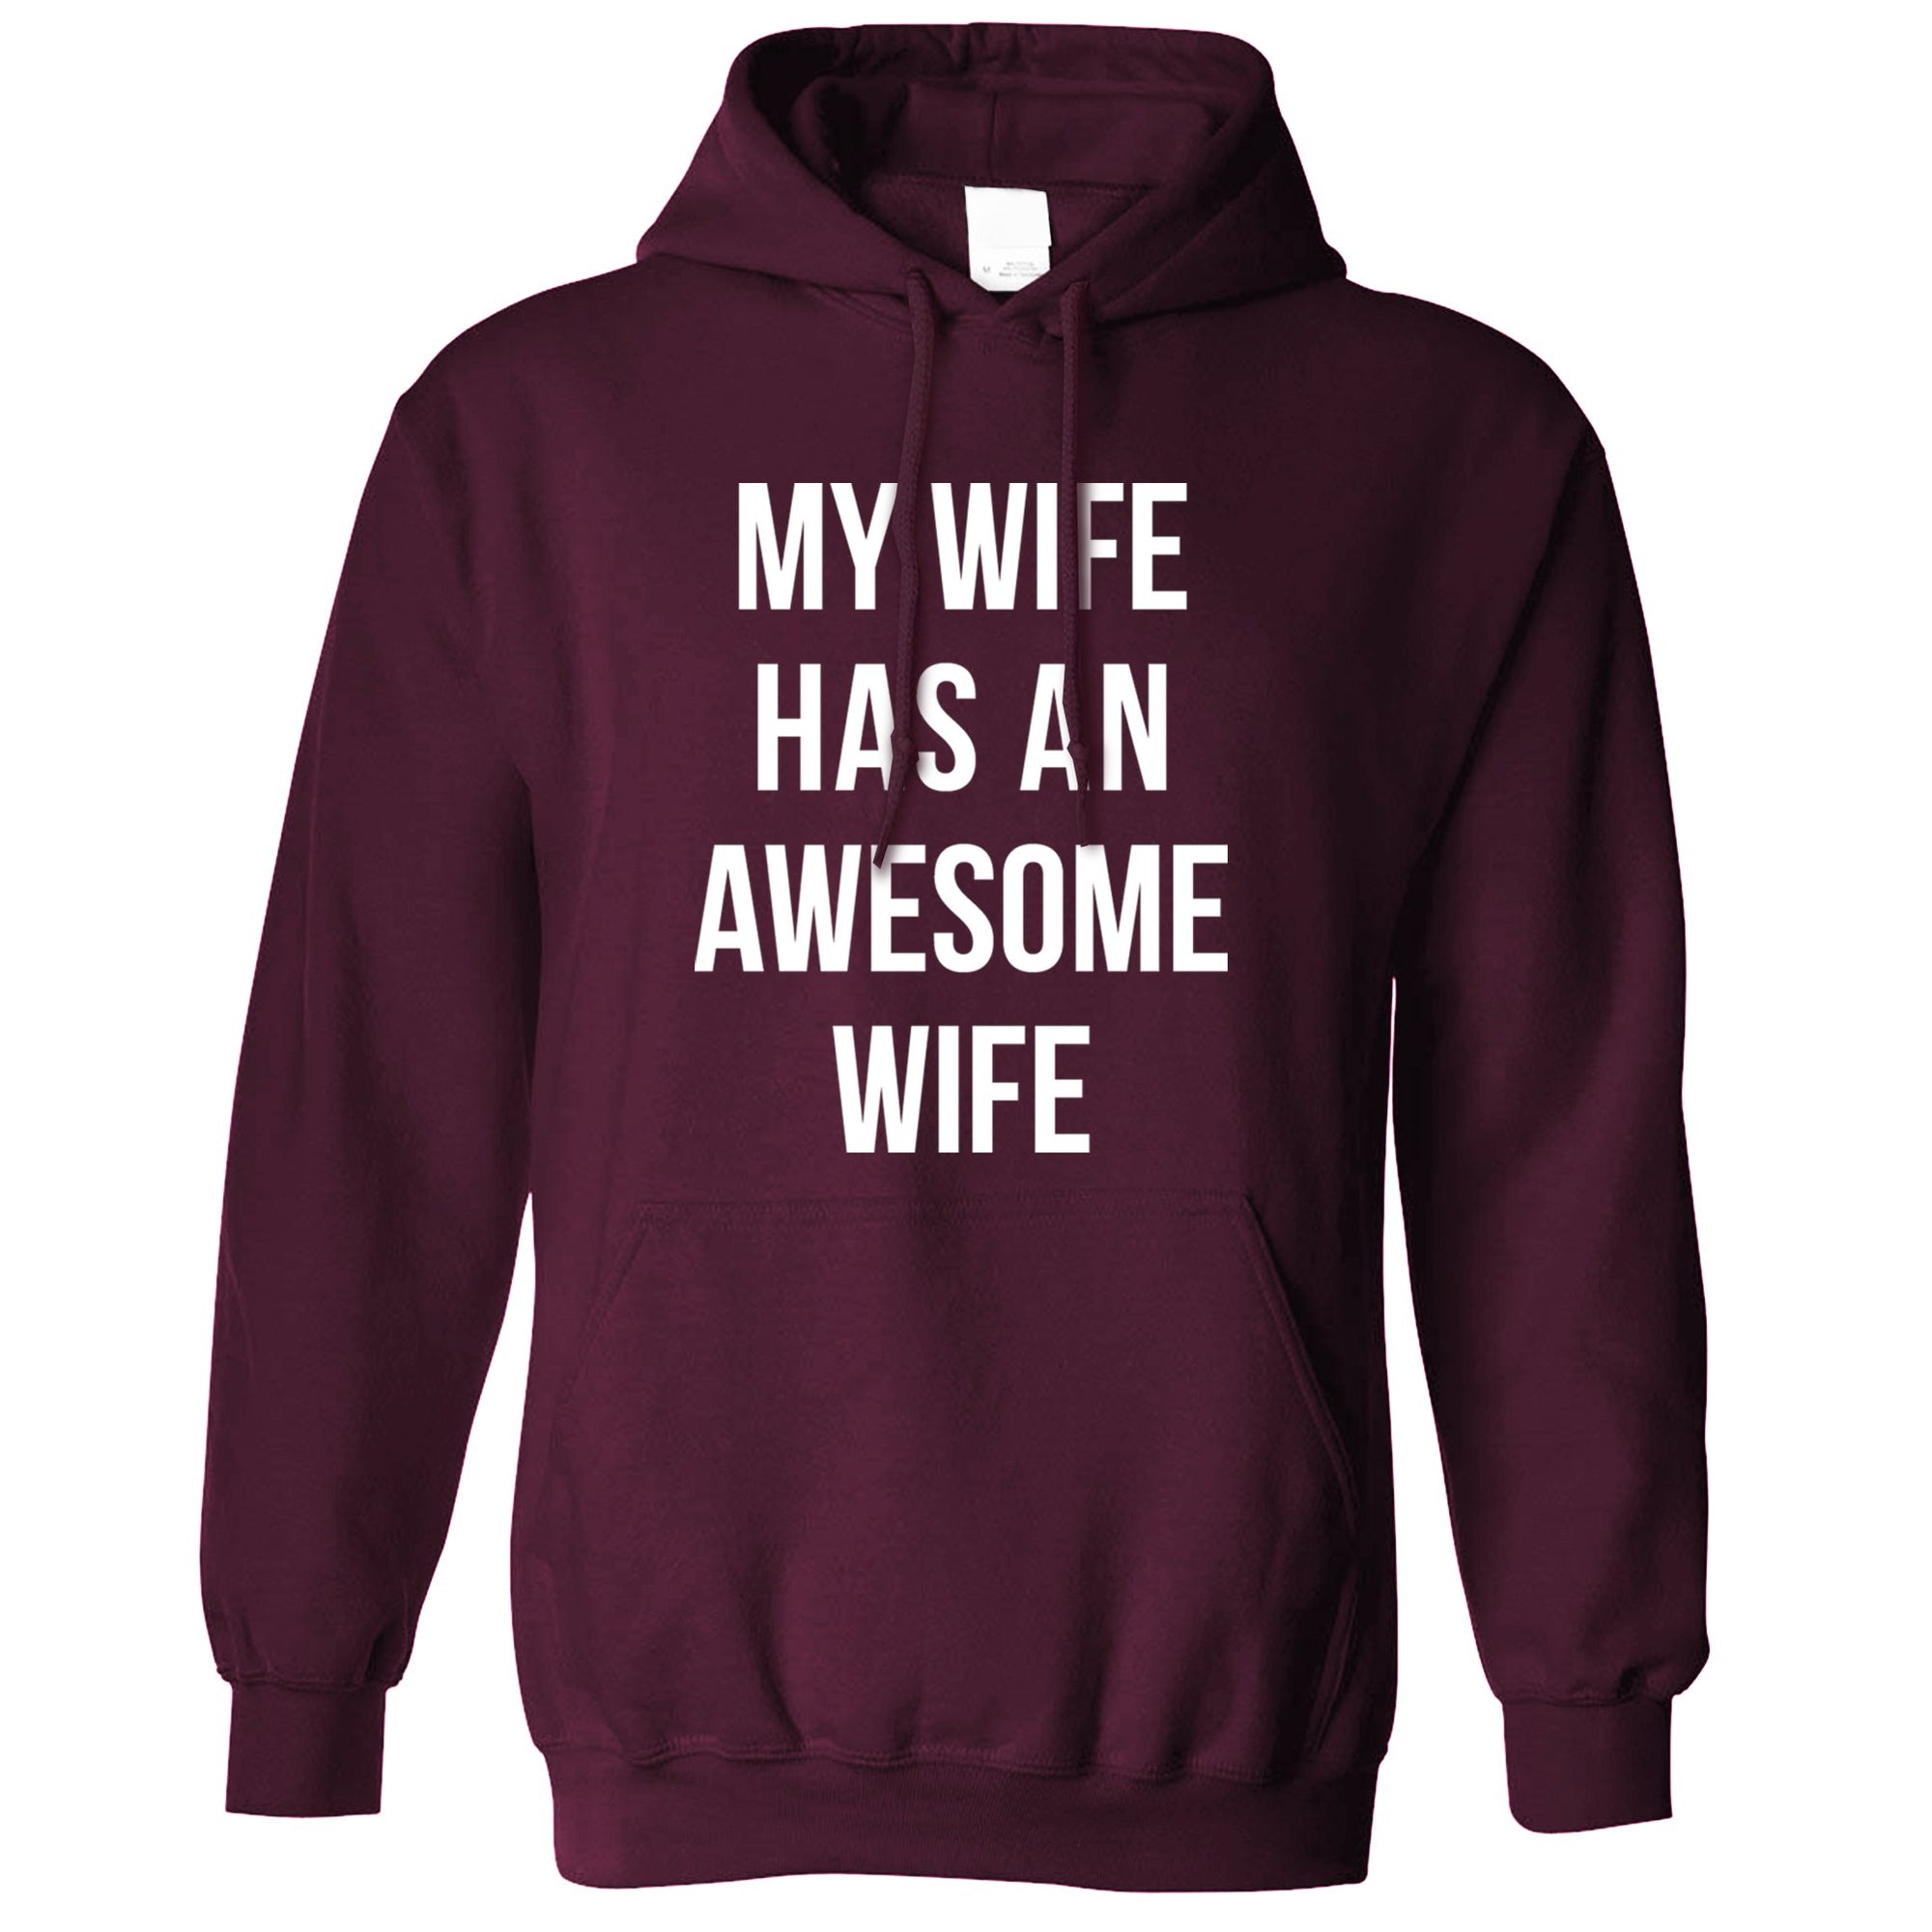 Joke Couples Hoodie My Wife Has An Awesome Wife Hooded Jumper - Shirtbox